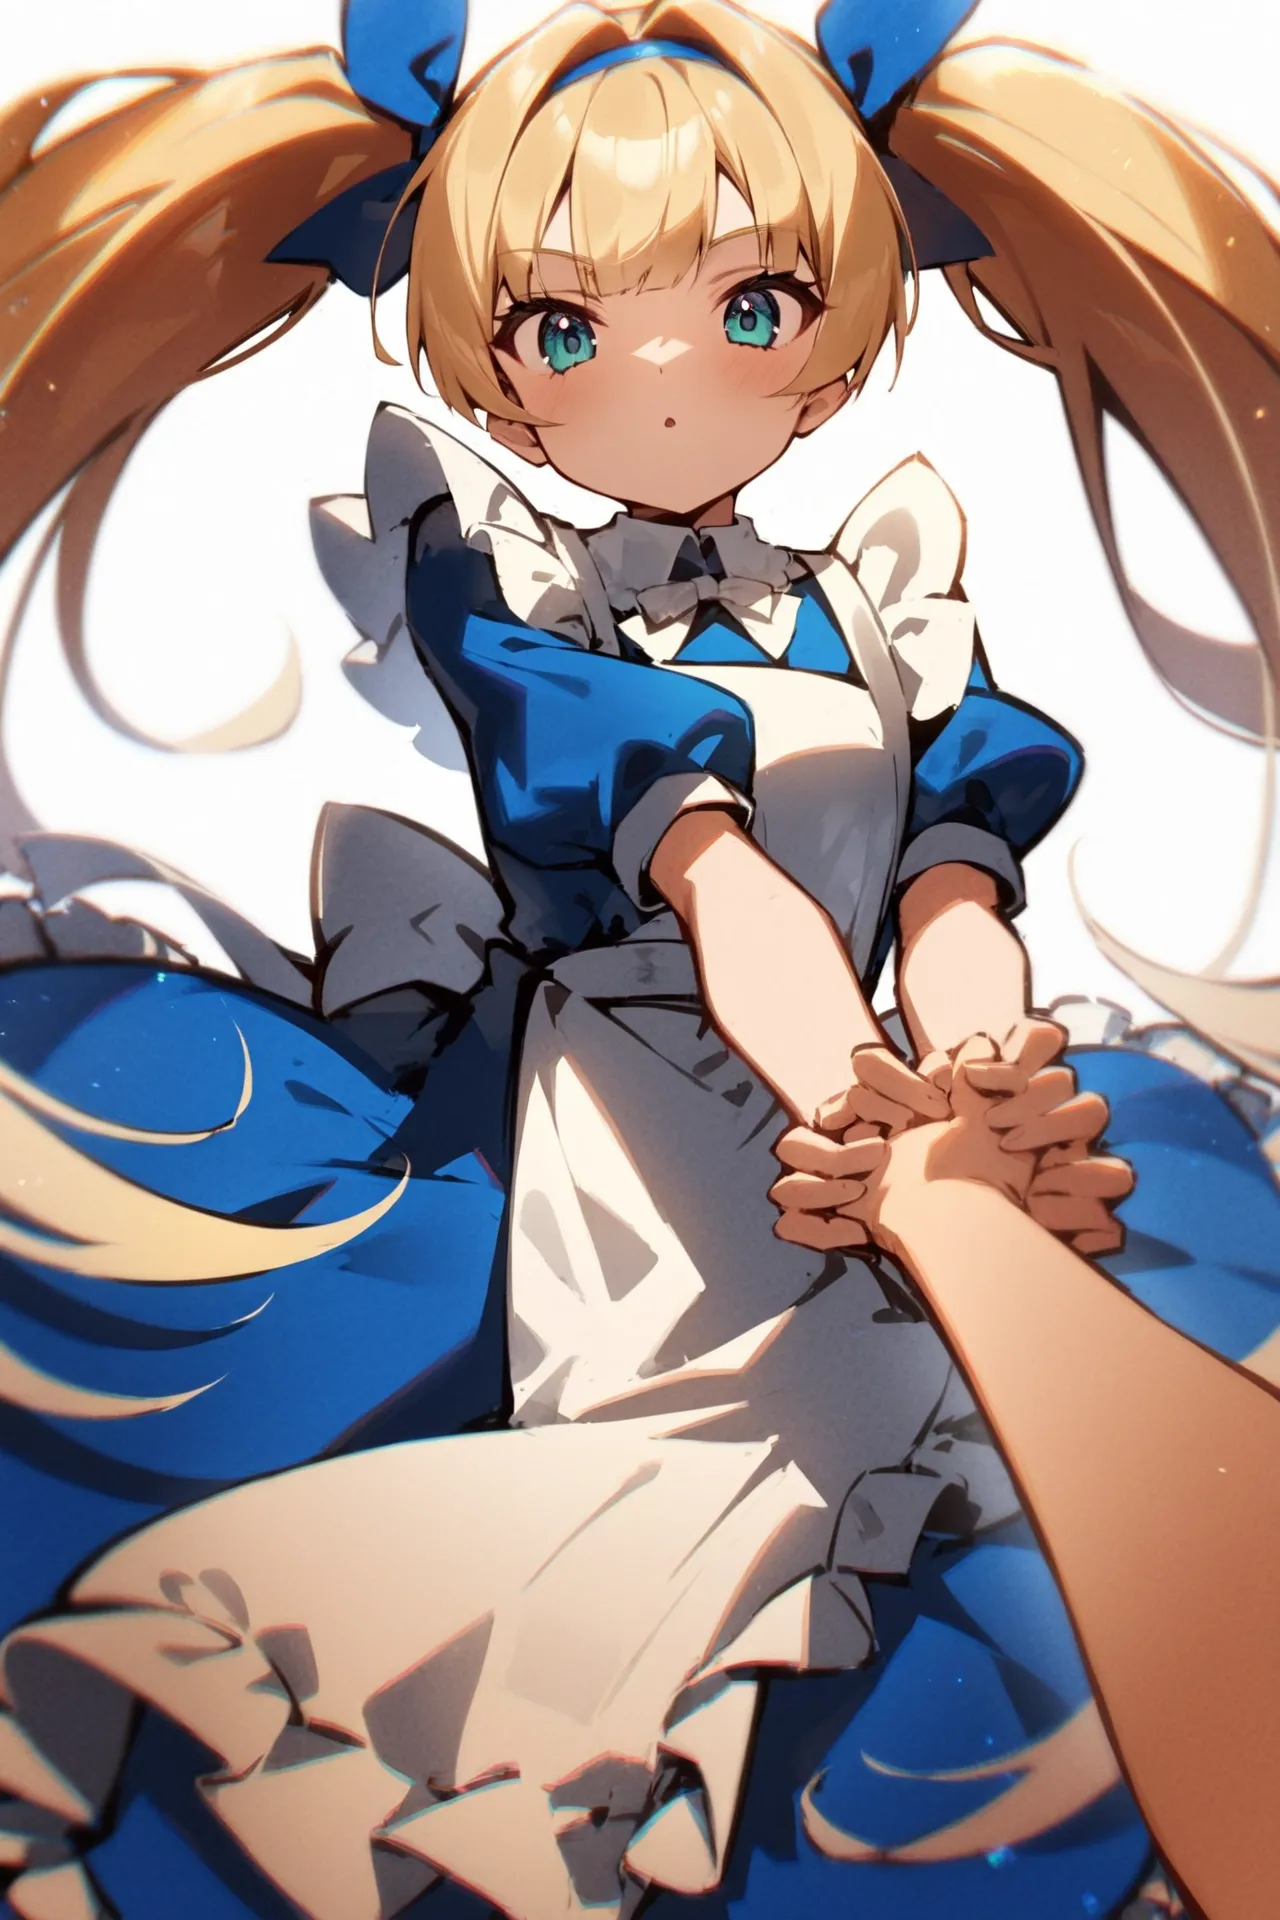 '1girl, pov,\nblonde hair, twintails, blue dress, white apron,\nwhite background,\nAlice in glitterworld\nNegative prompt: (worst quality, low quality:1.4), nsfw\nSteps: 35, Sampler: DPM++ 2M SDE Karras, CFG scale: 7, Seed: 1, Size: 640x960, Model hash: 642b08ca49, Model: ConfusionXL2.0_fp16_vae, VAE hash: 63aeecb90f, VAE: sdxl_vae_0.9.safetensors, Denoising strength: 0.6, Clip skip: 2, Hires upscale: 2, Hires steps: 15, Hires upscaler: ESRGAN_4x, Eta: 0.68, Version: v1.7.0'